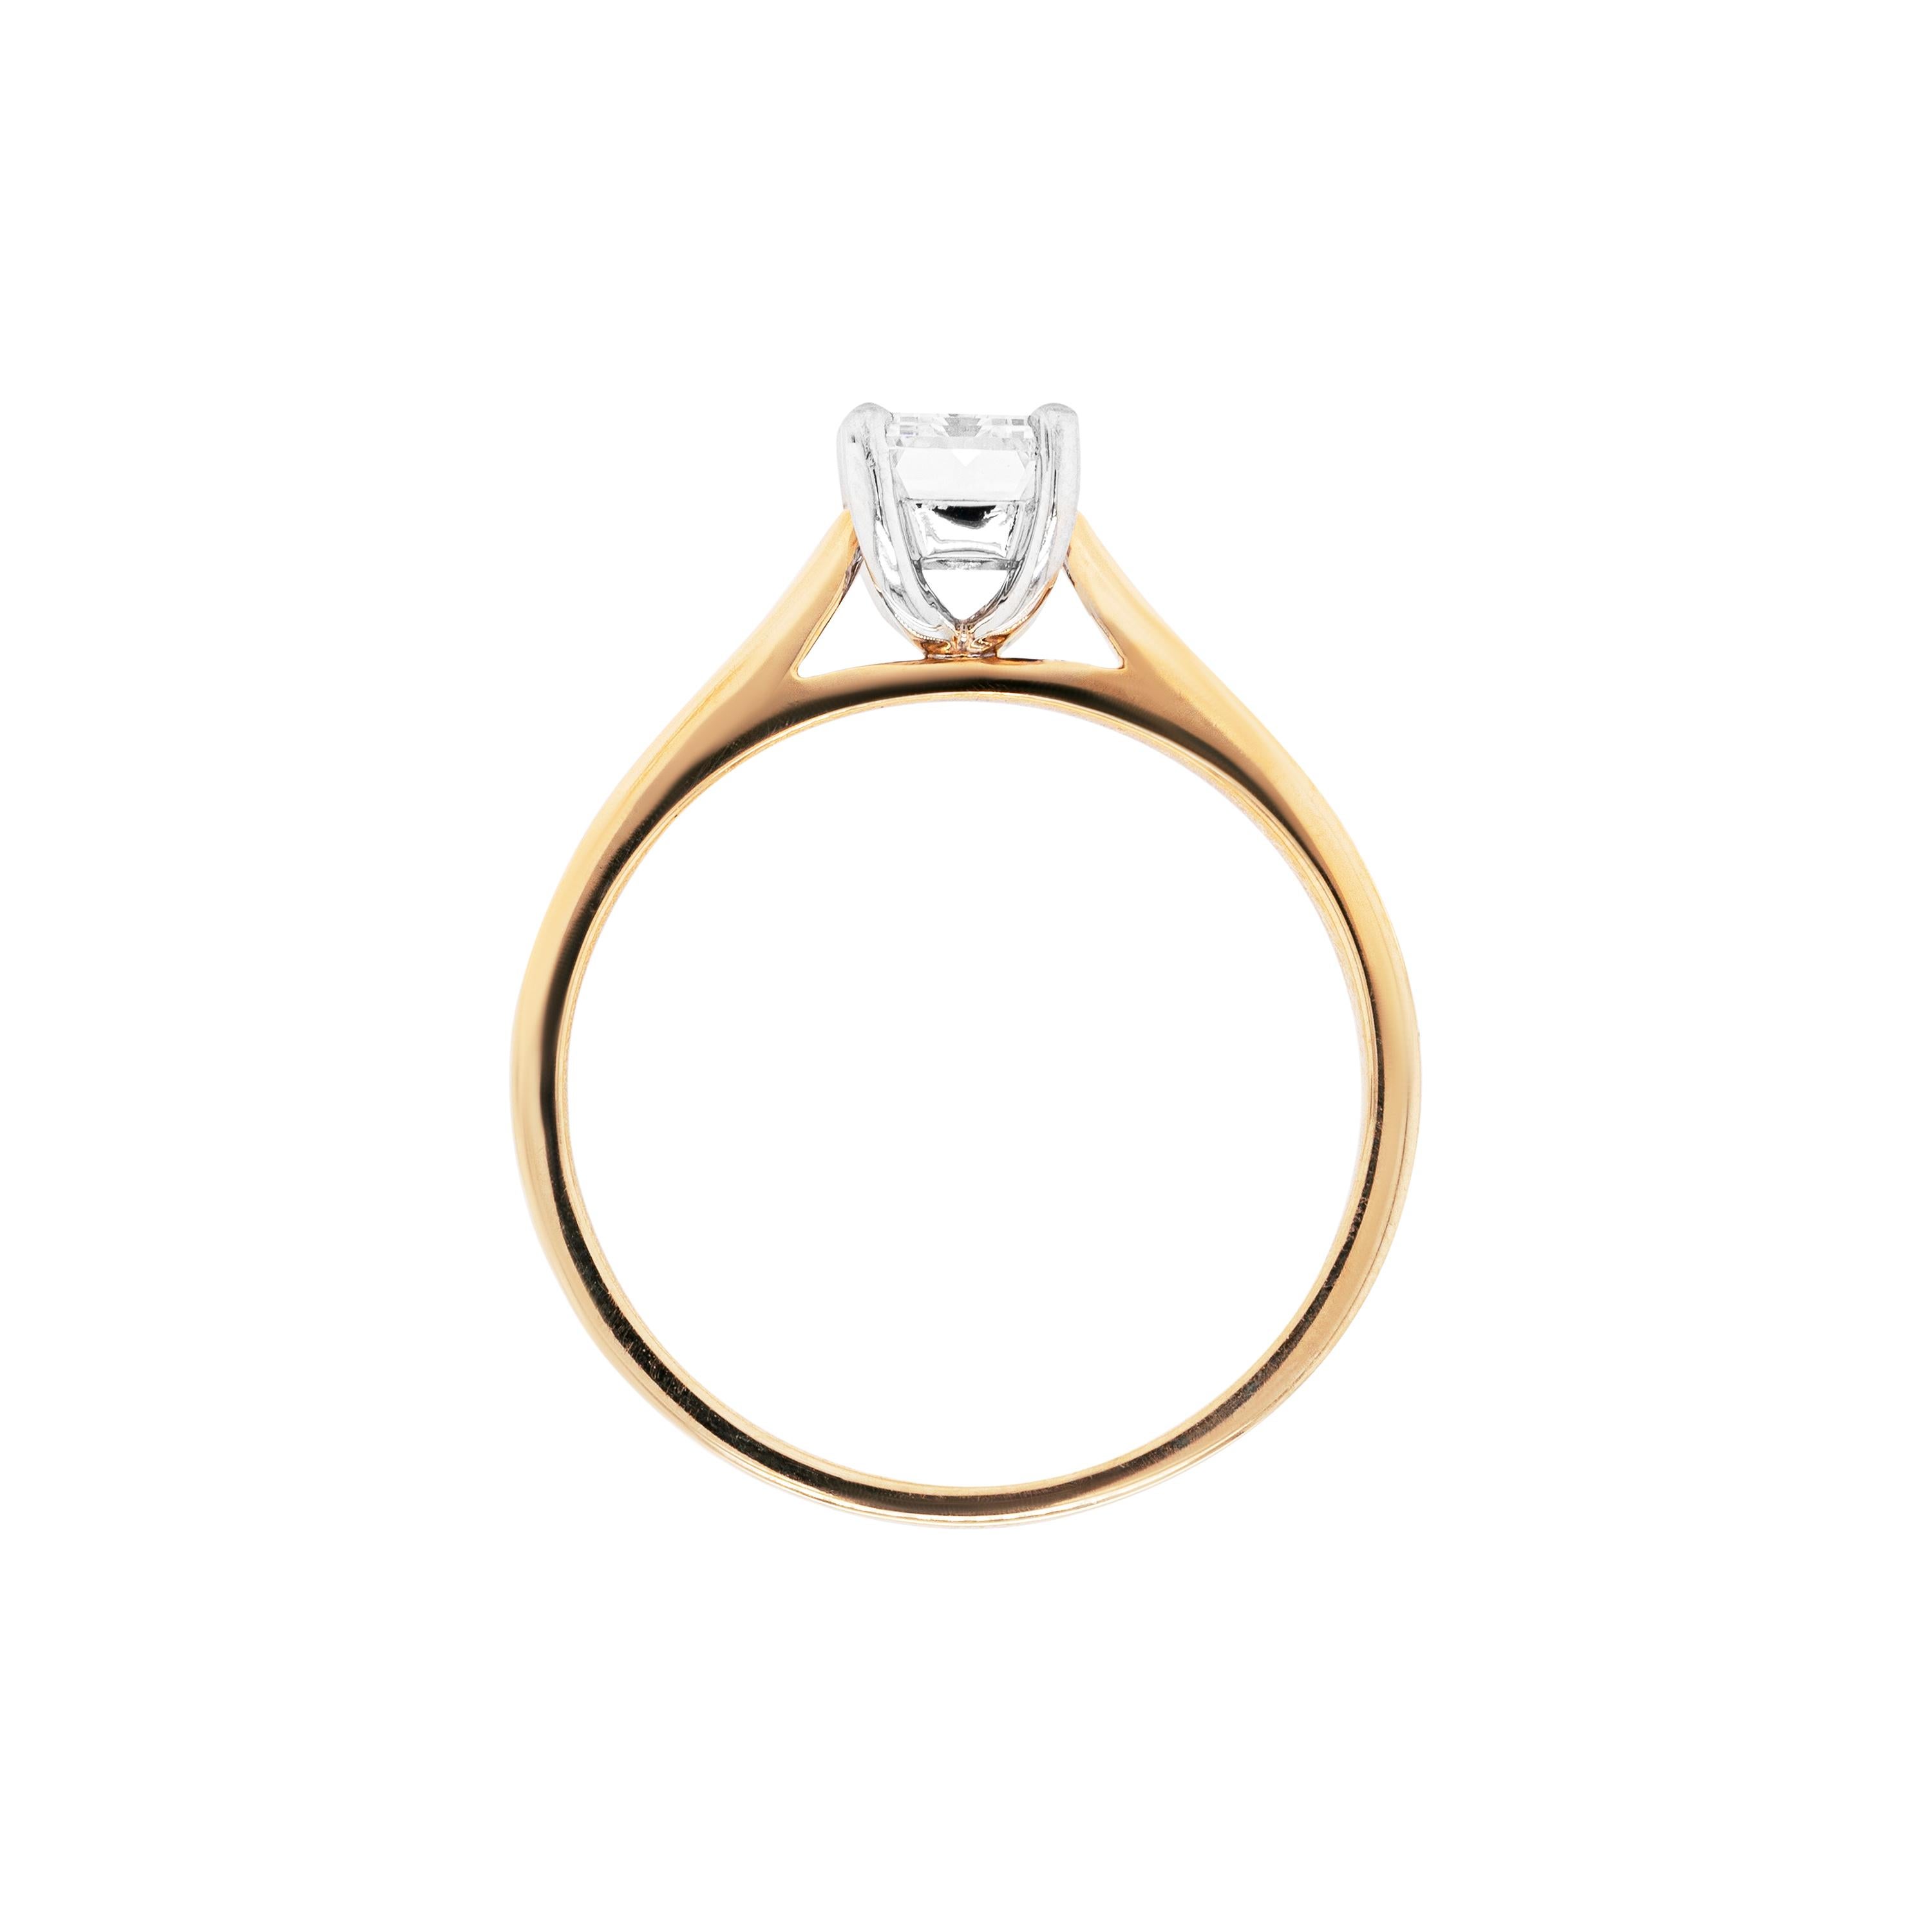 This dainty solitaire engagement ring features a certified 1.00 carat baguette cut diamond, graded F in colour and VS2 in clarity, mounted in an 18 carat white gold four claw, open back setting. The exquisite stone sits beautifully atop a